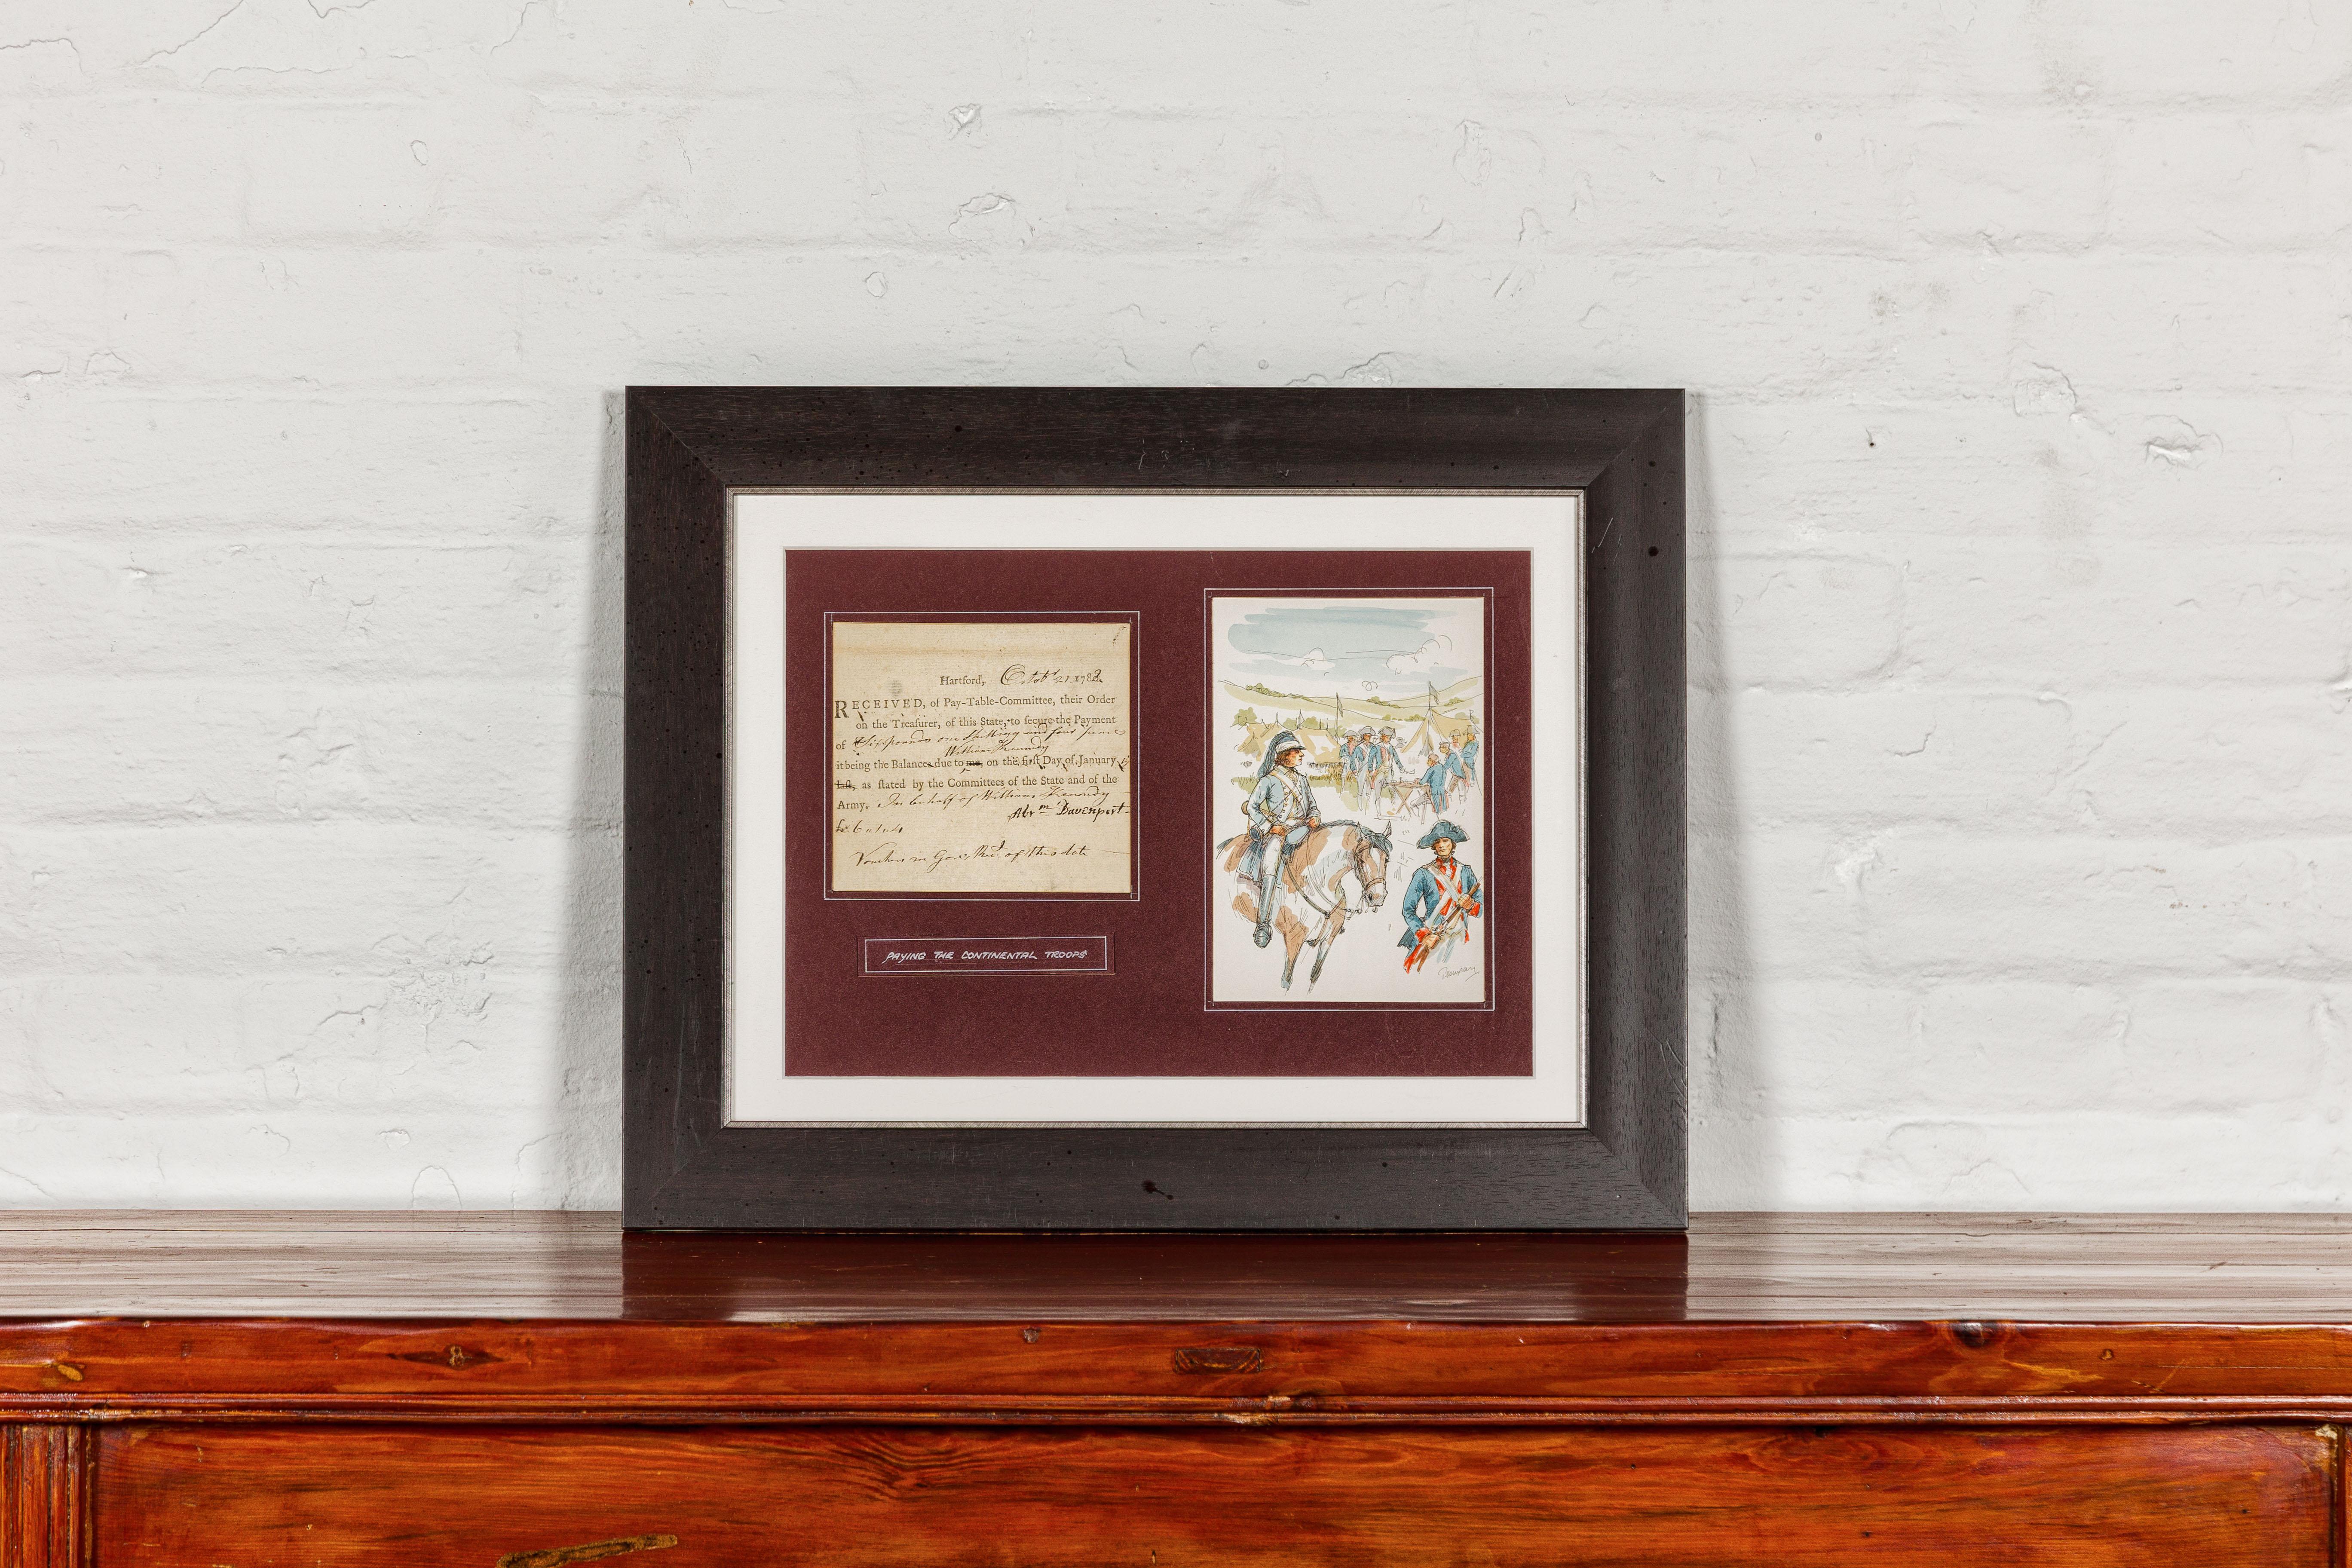 An American Revolutionary war bond from the State of Connecticut from the late 18th century in custom black frame under glass. This late 18th-century American Revolutionary War bond from the State of Connecticut is a historical artifact that brings